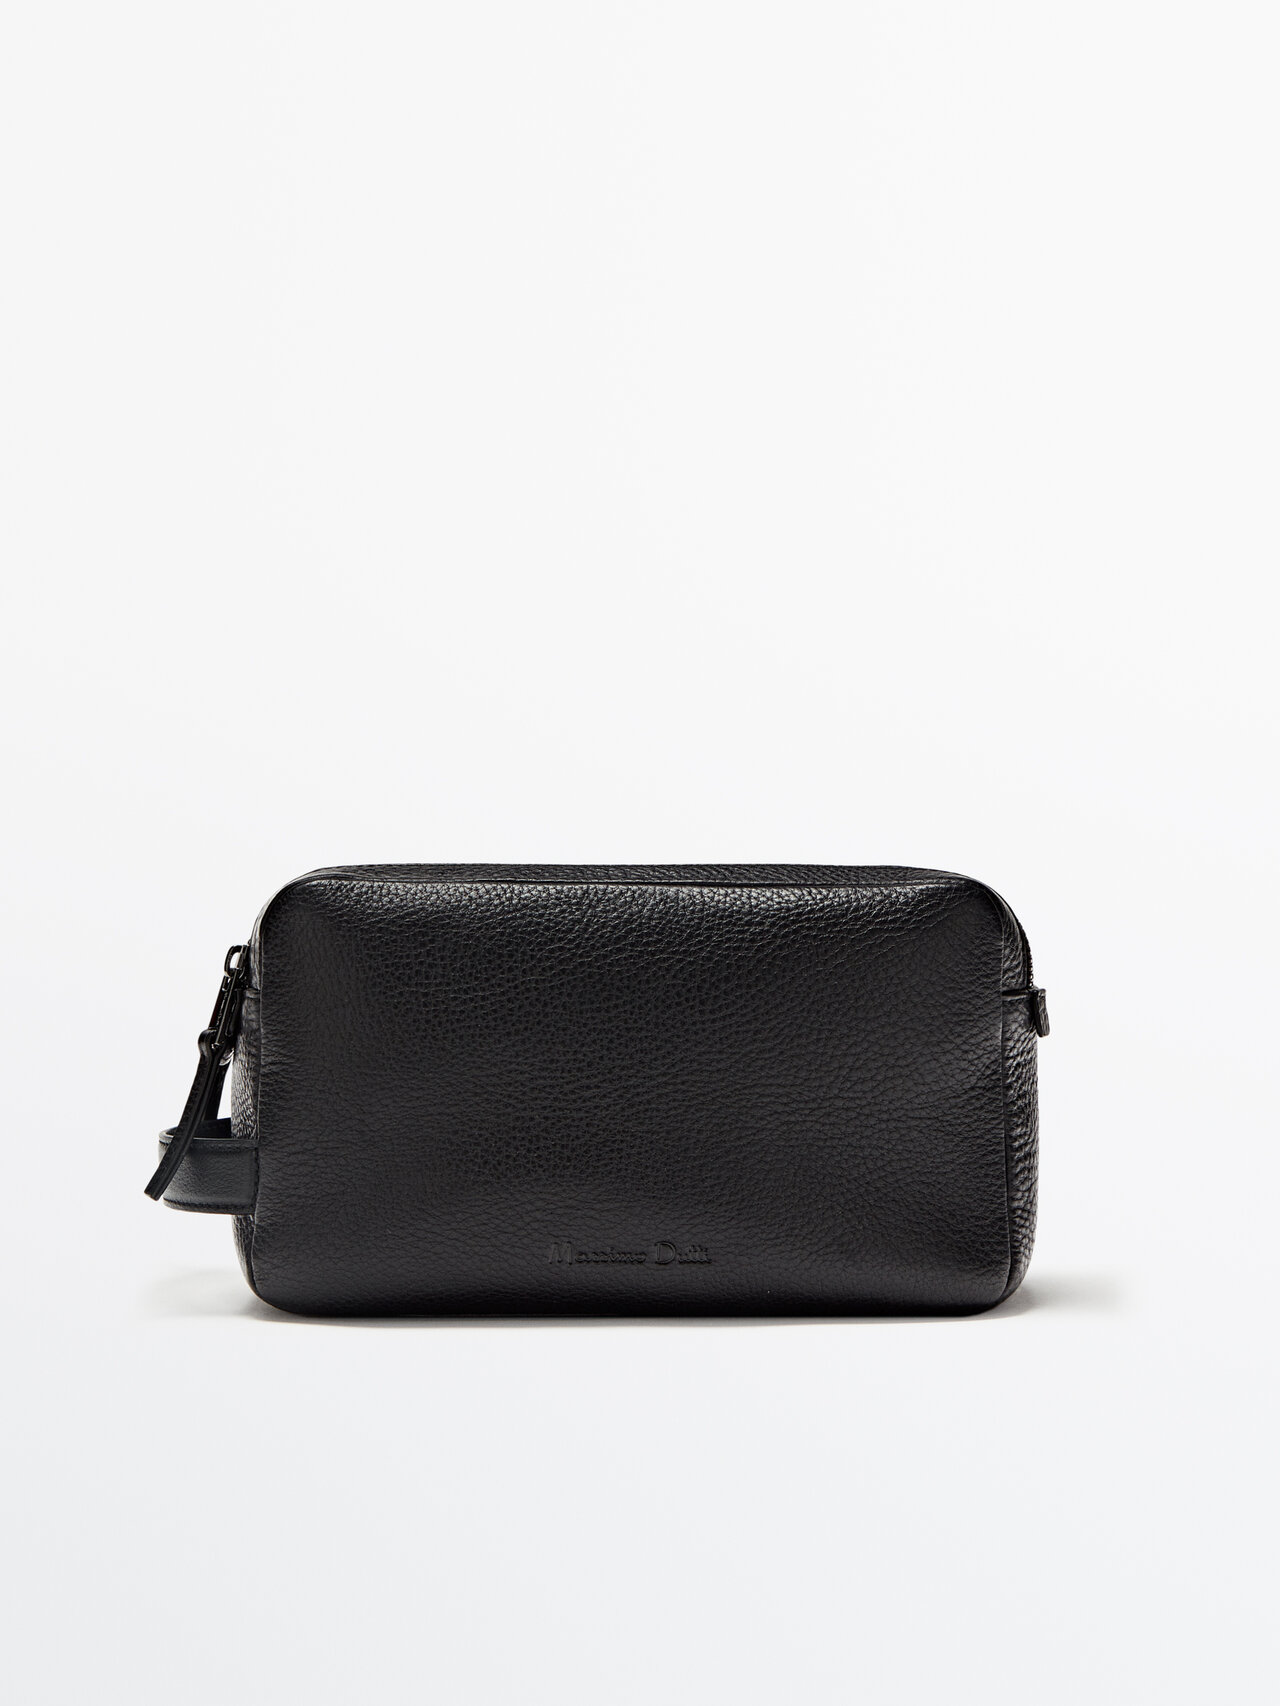 Massimo Dutti Leather Double Zip Toiletry Bag In Black